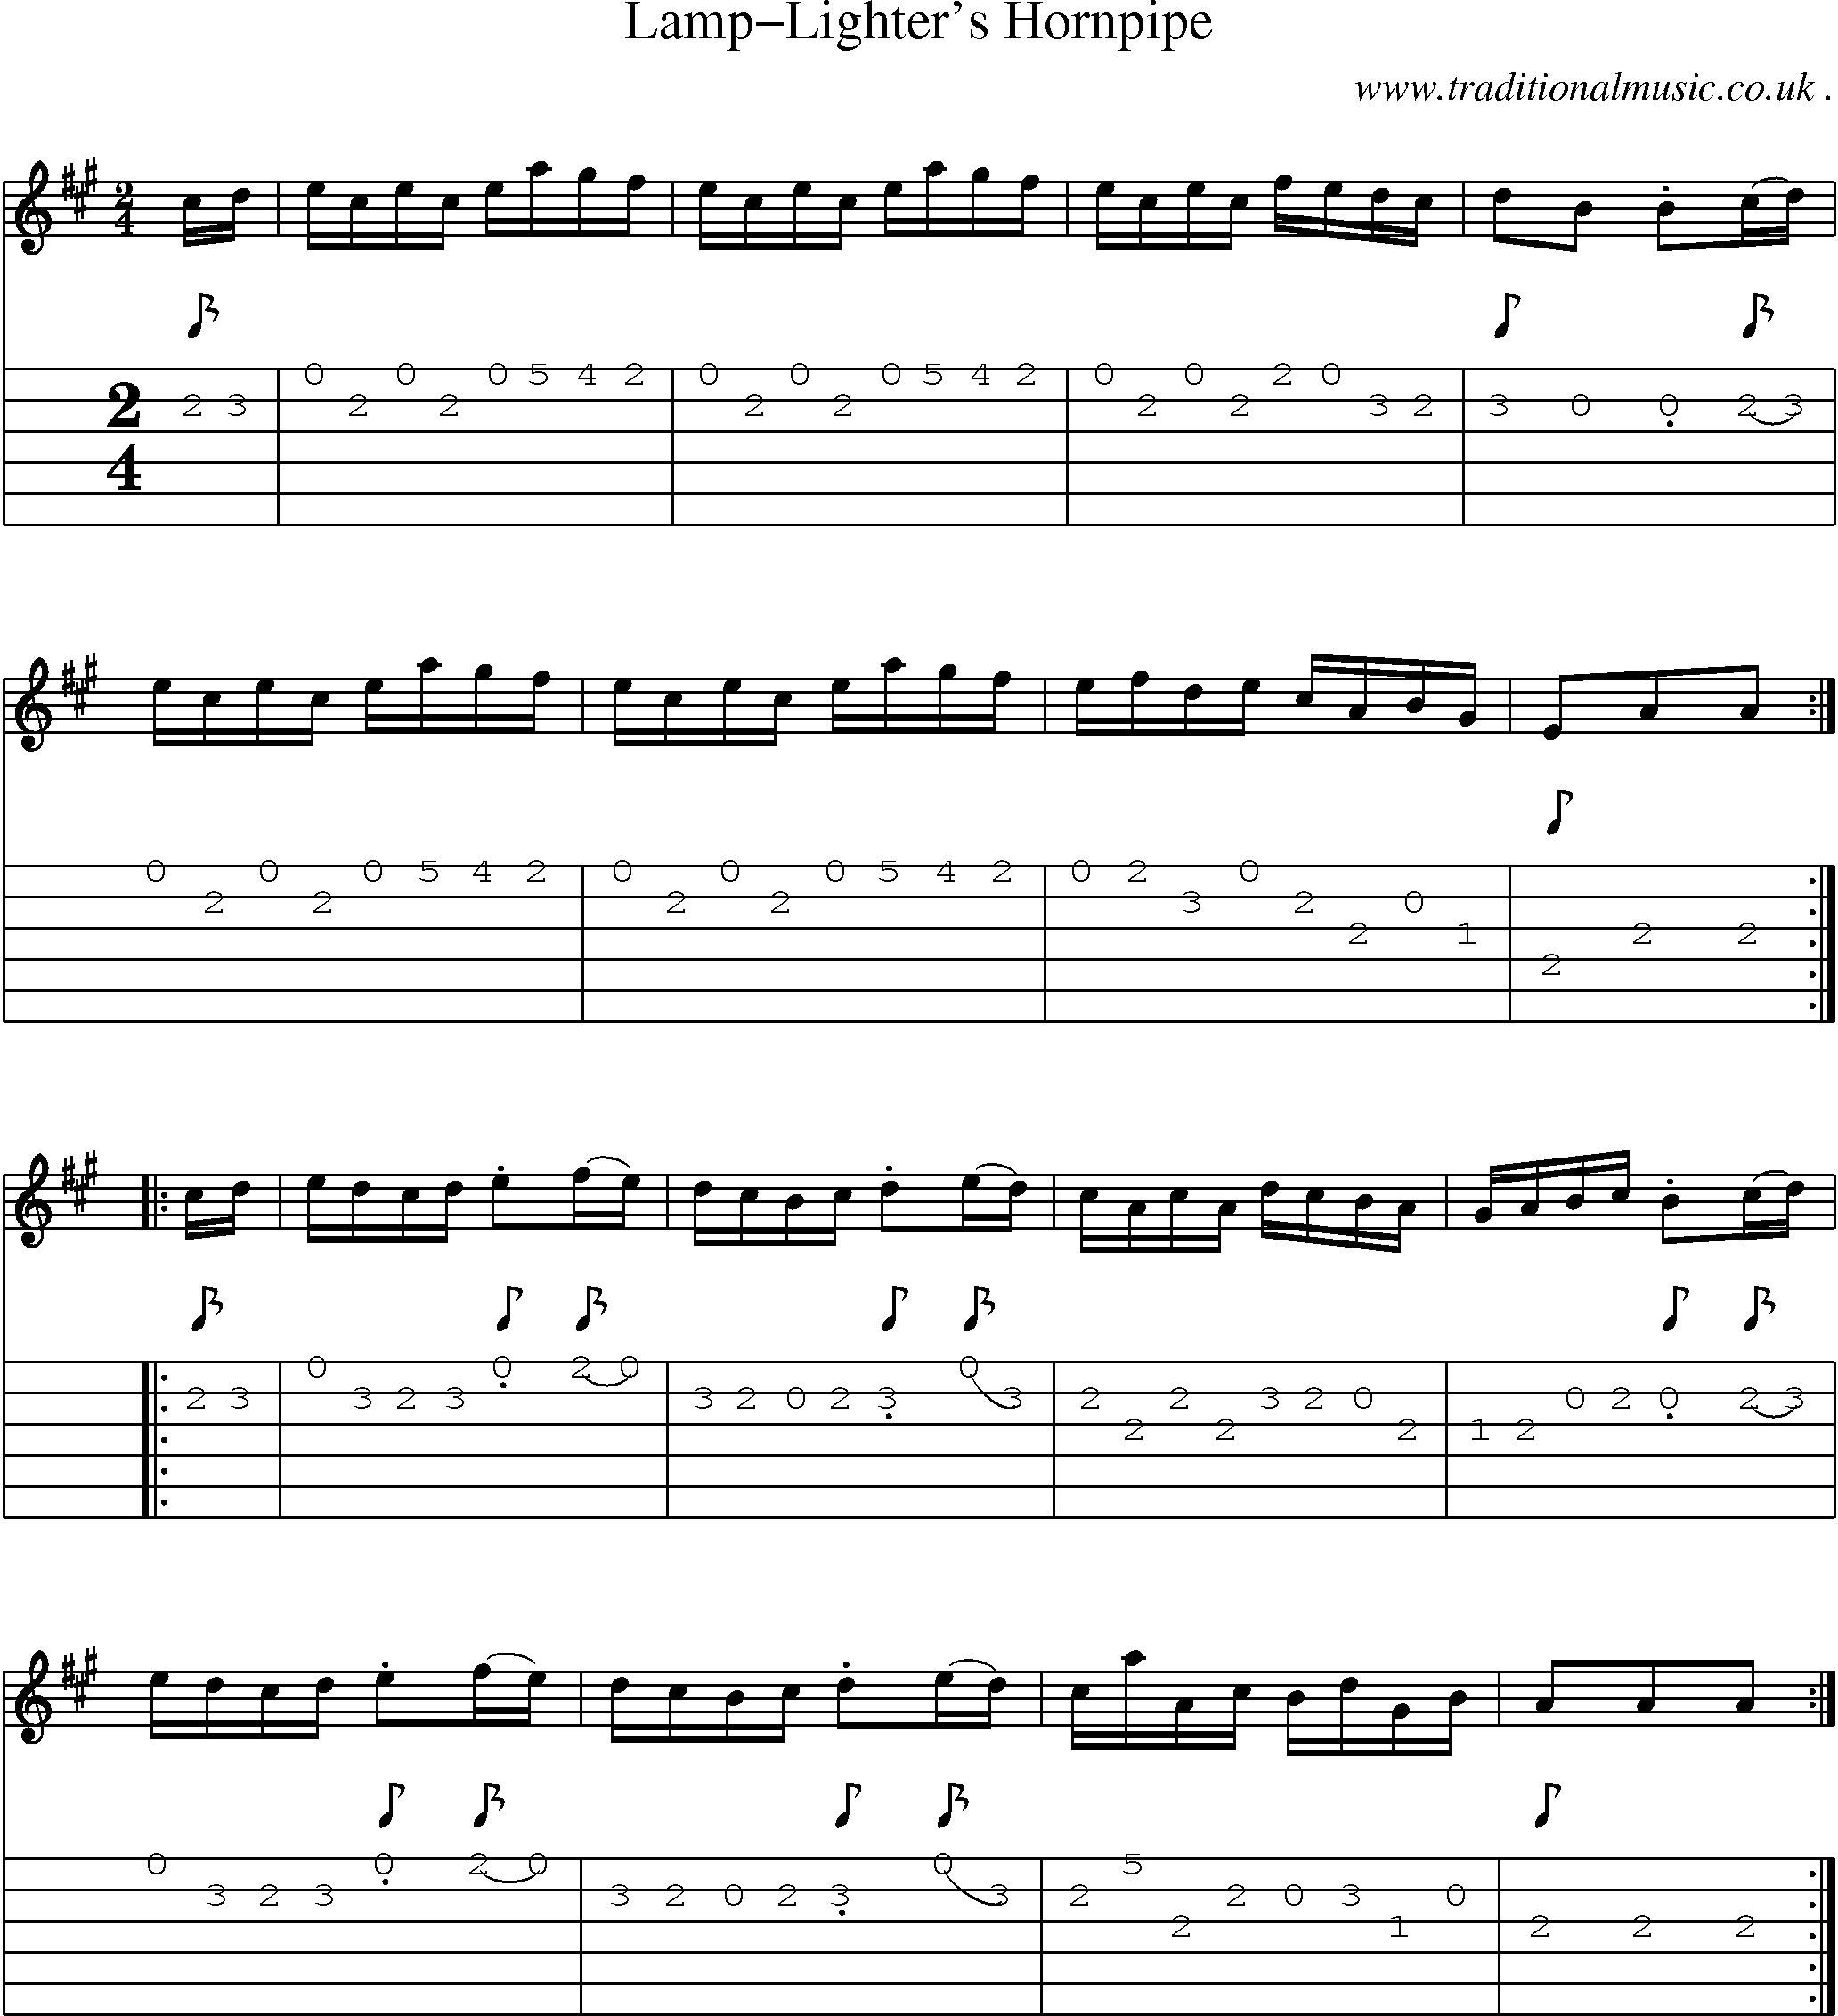 Sheet-Music and Guitar Tabs for Lamp-lighters Hornpipe